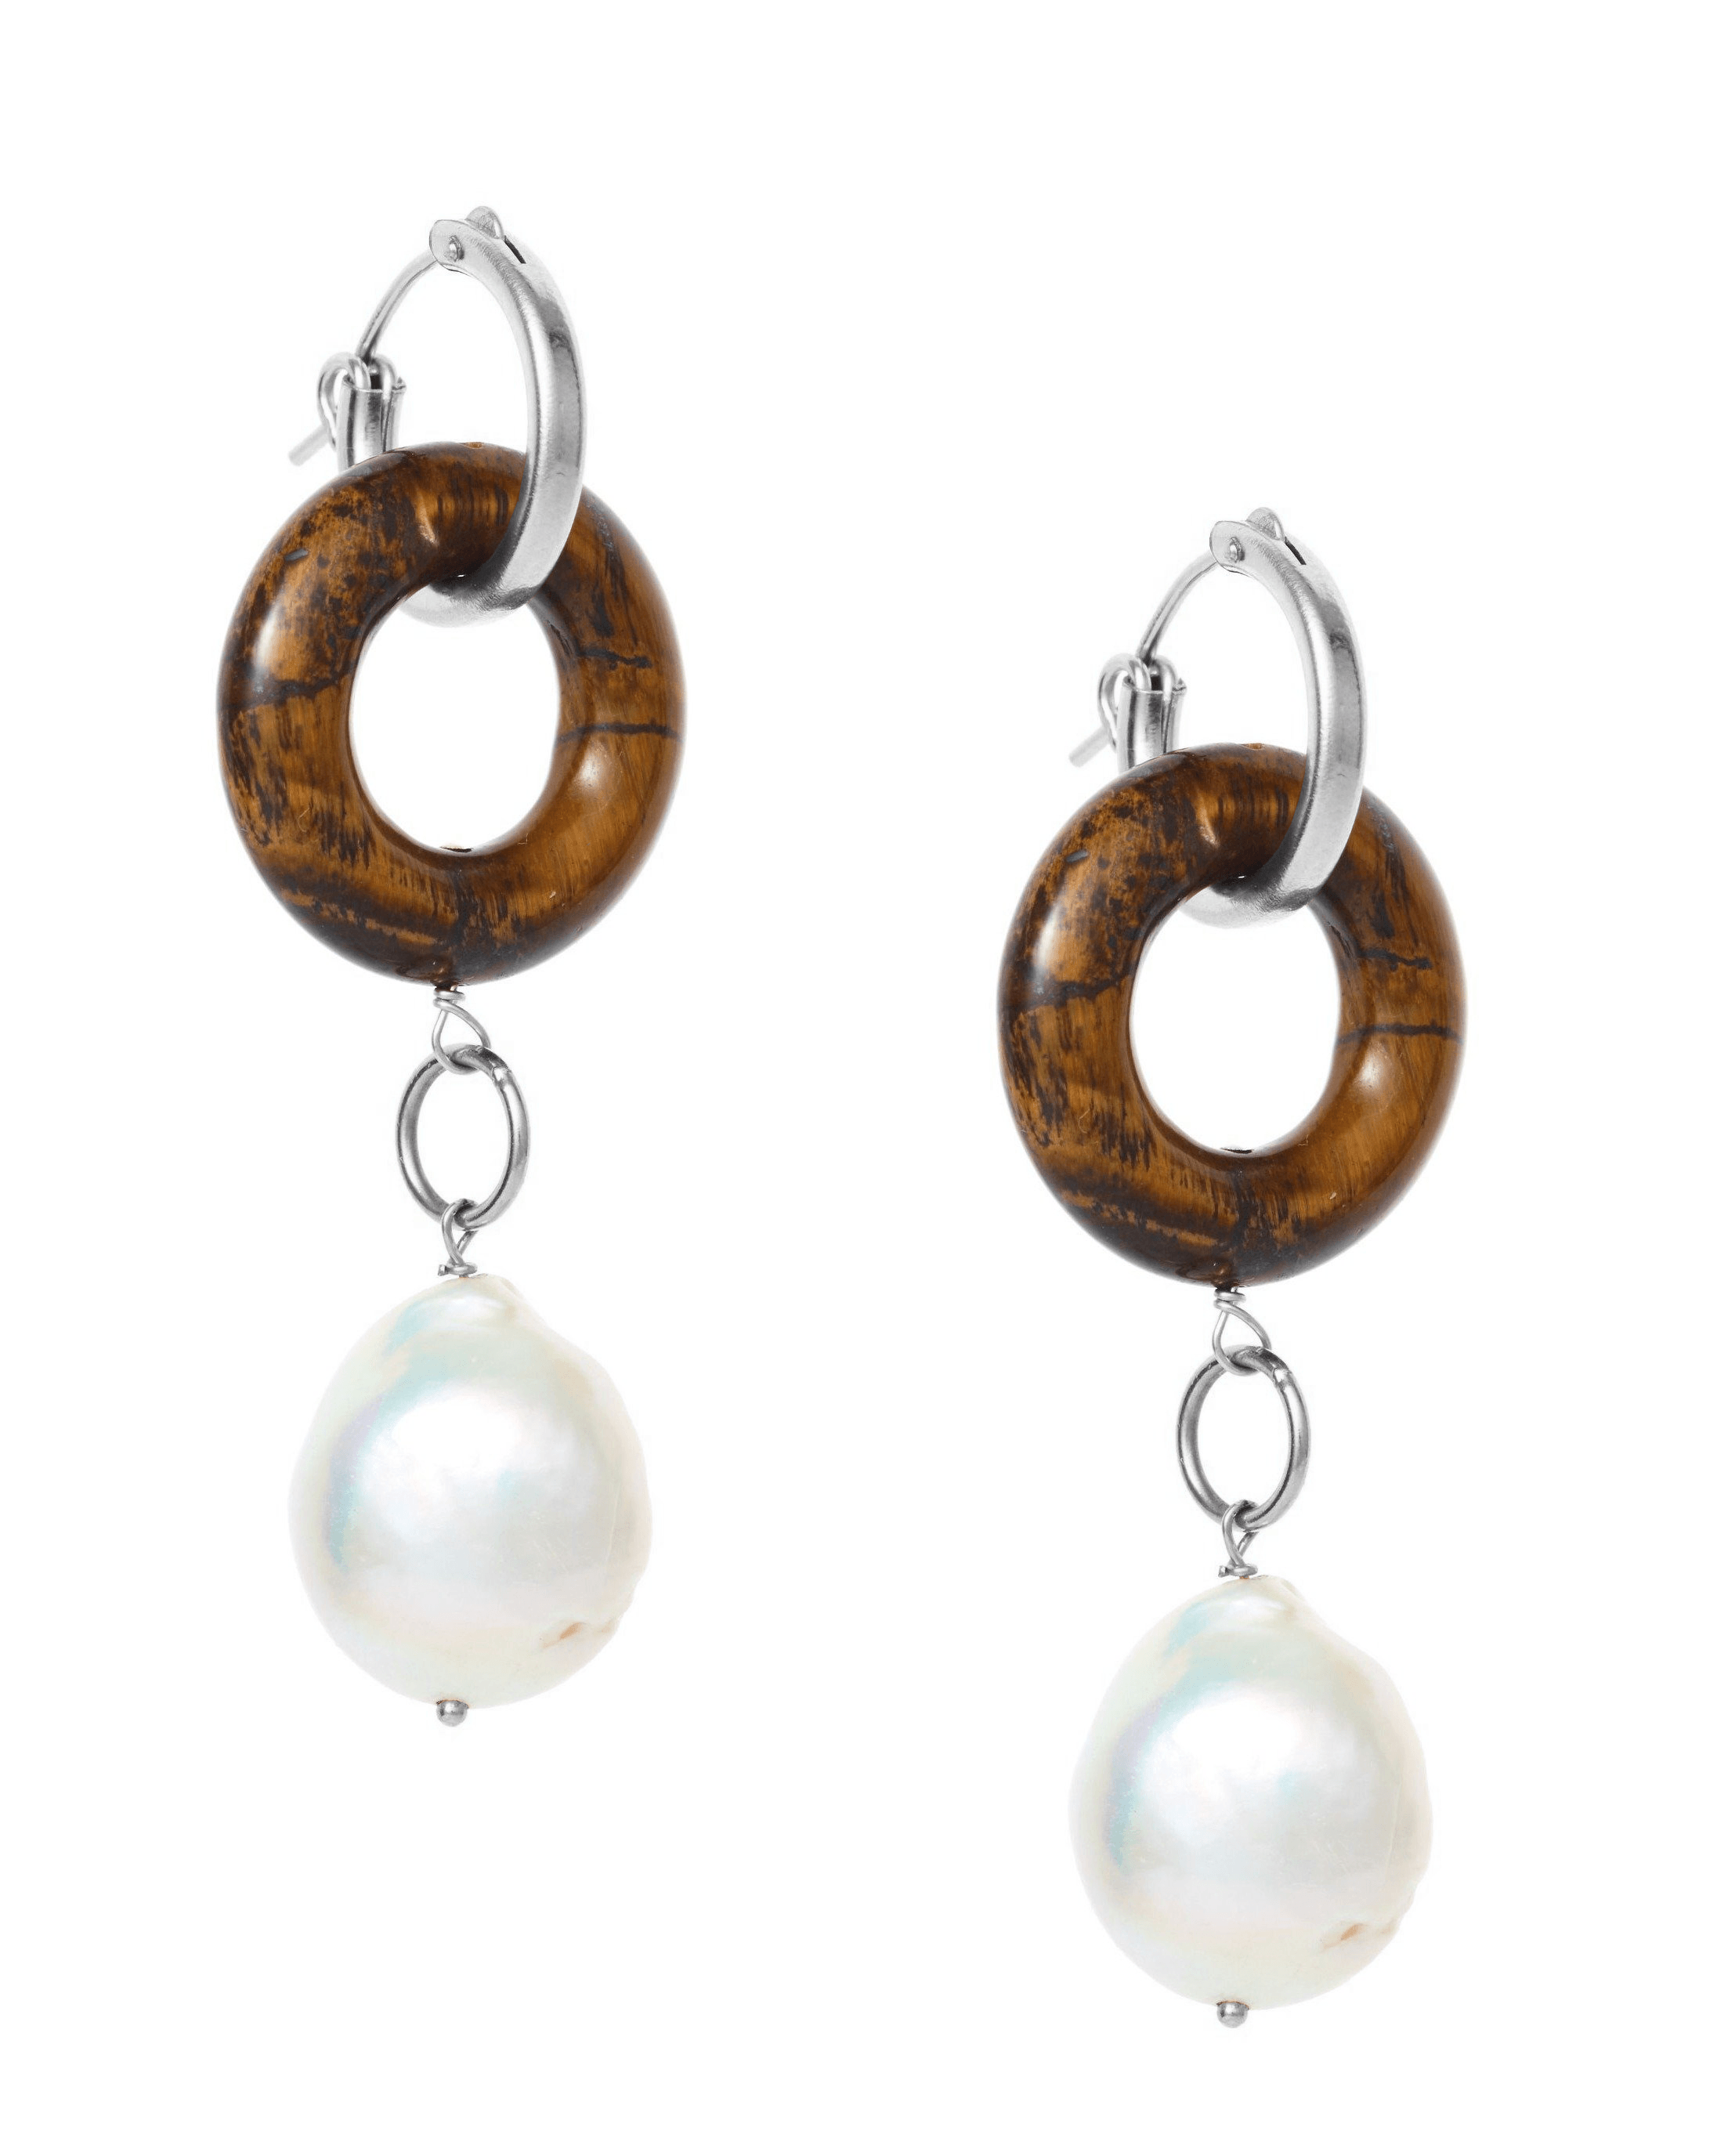 Cerceau Pearl Hoops by Kozakh. 15mm hoop dangling earrings with snap closure, crafted in Sterling Silver, featuring a doughnut shape Tiger's Eye gemstone and a Baroque Pearl.